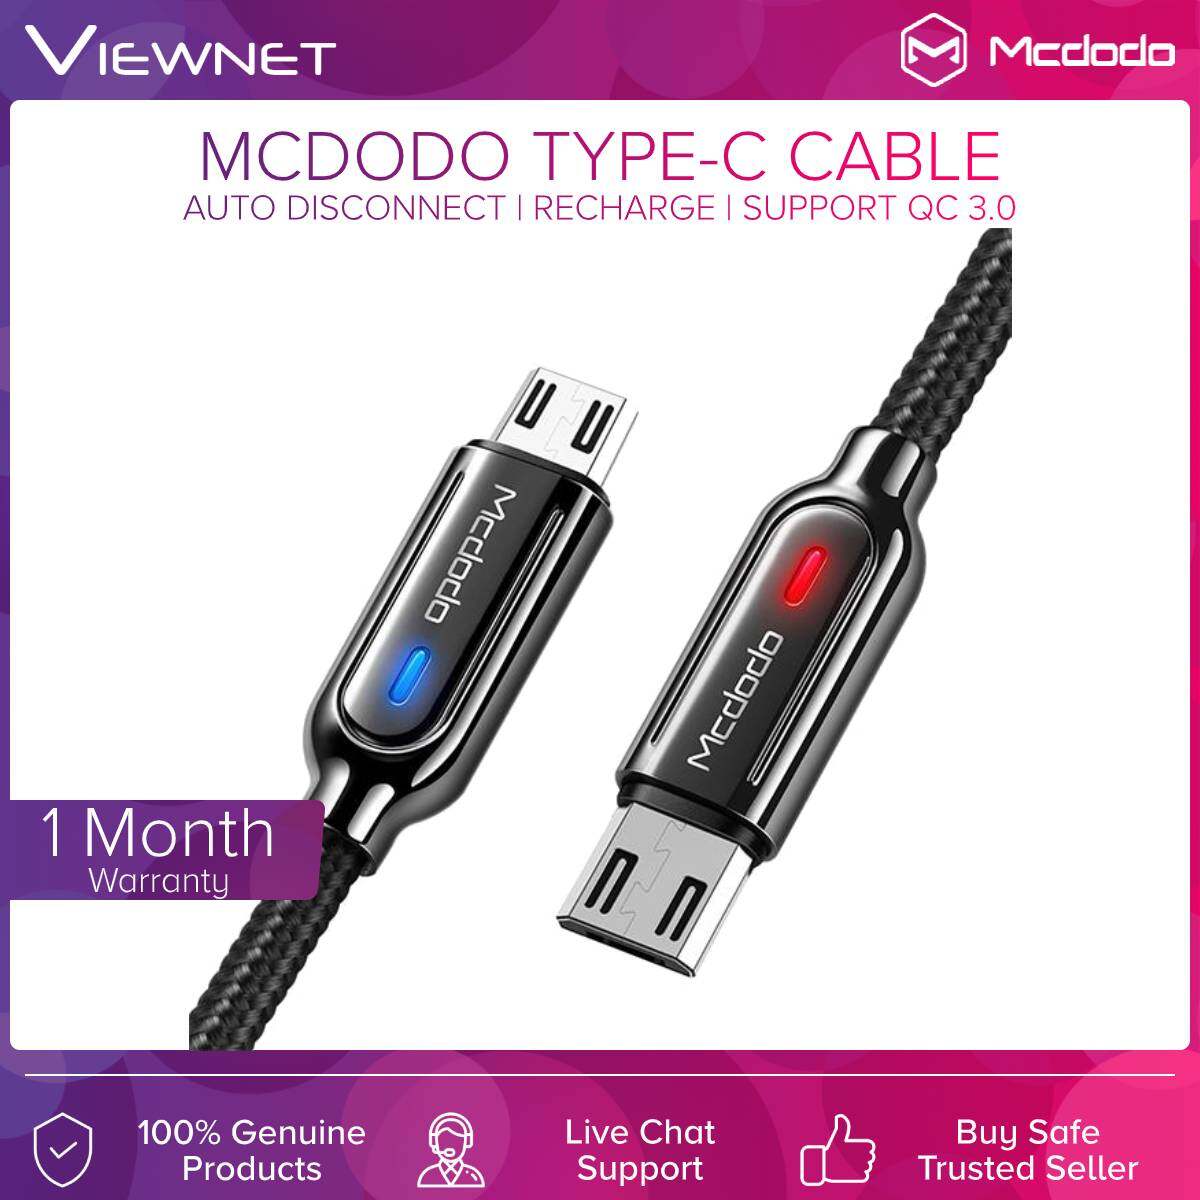 Mcdodo Smart Series Auto Disconnect & Recharge Micro USB / Type-C Cable 1M